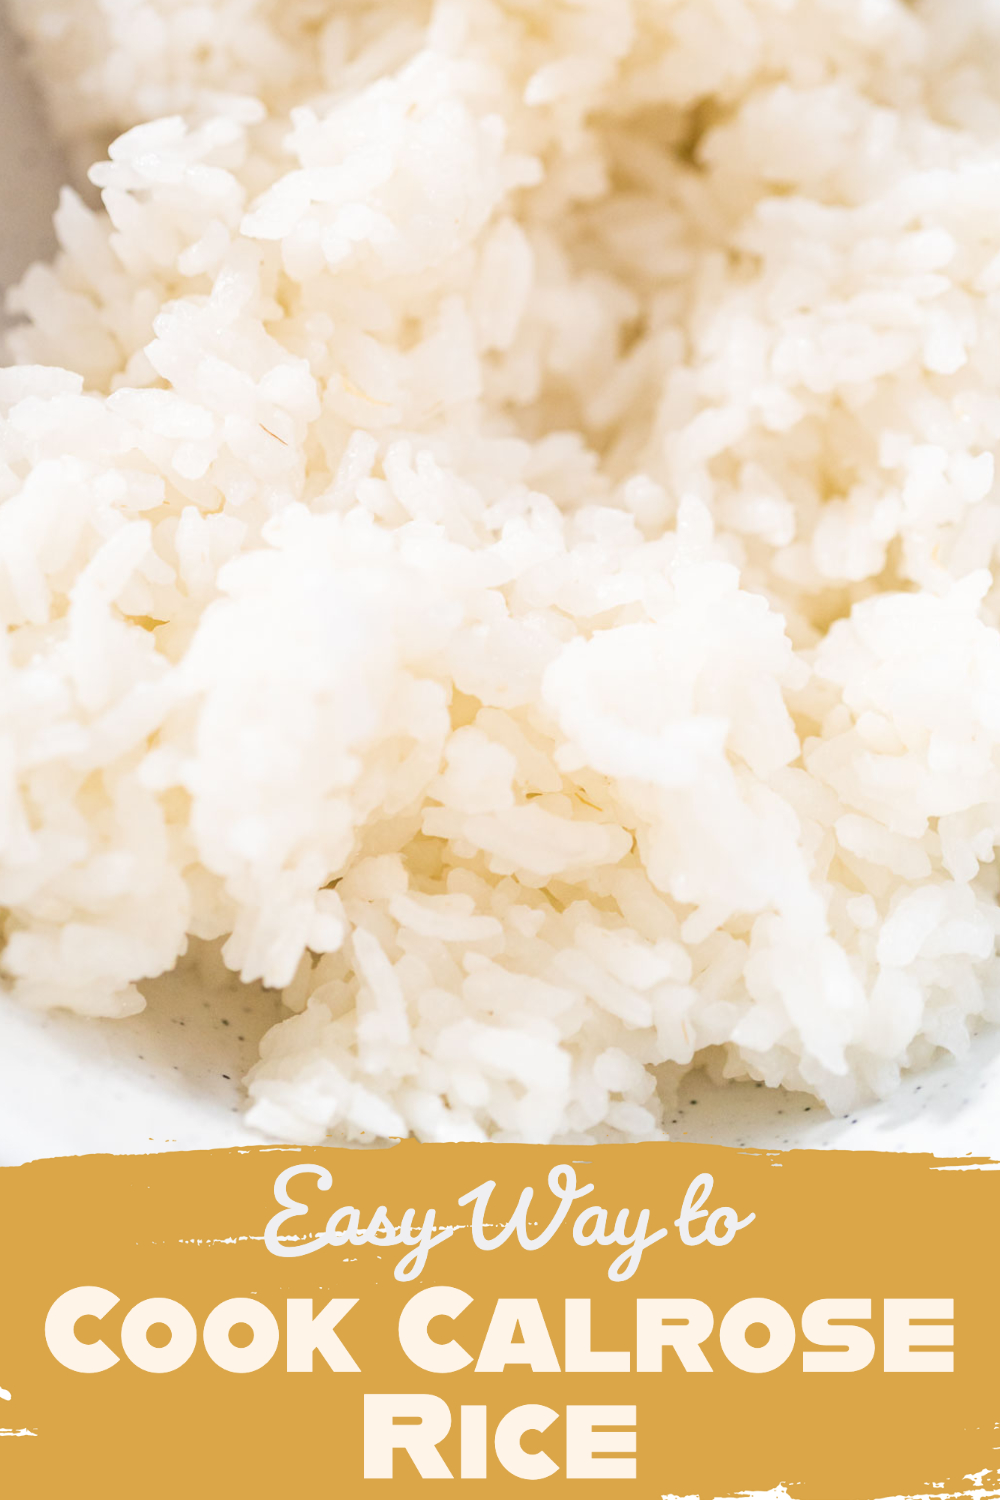 Easy Way to Cook Calrose Rice